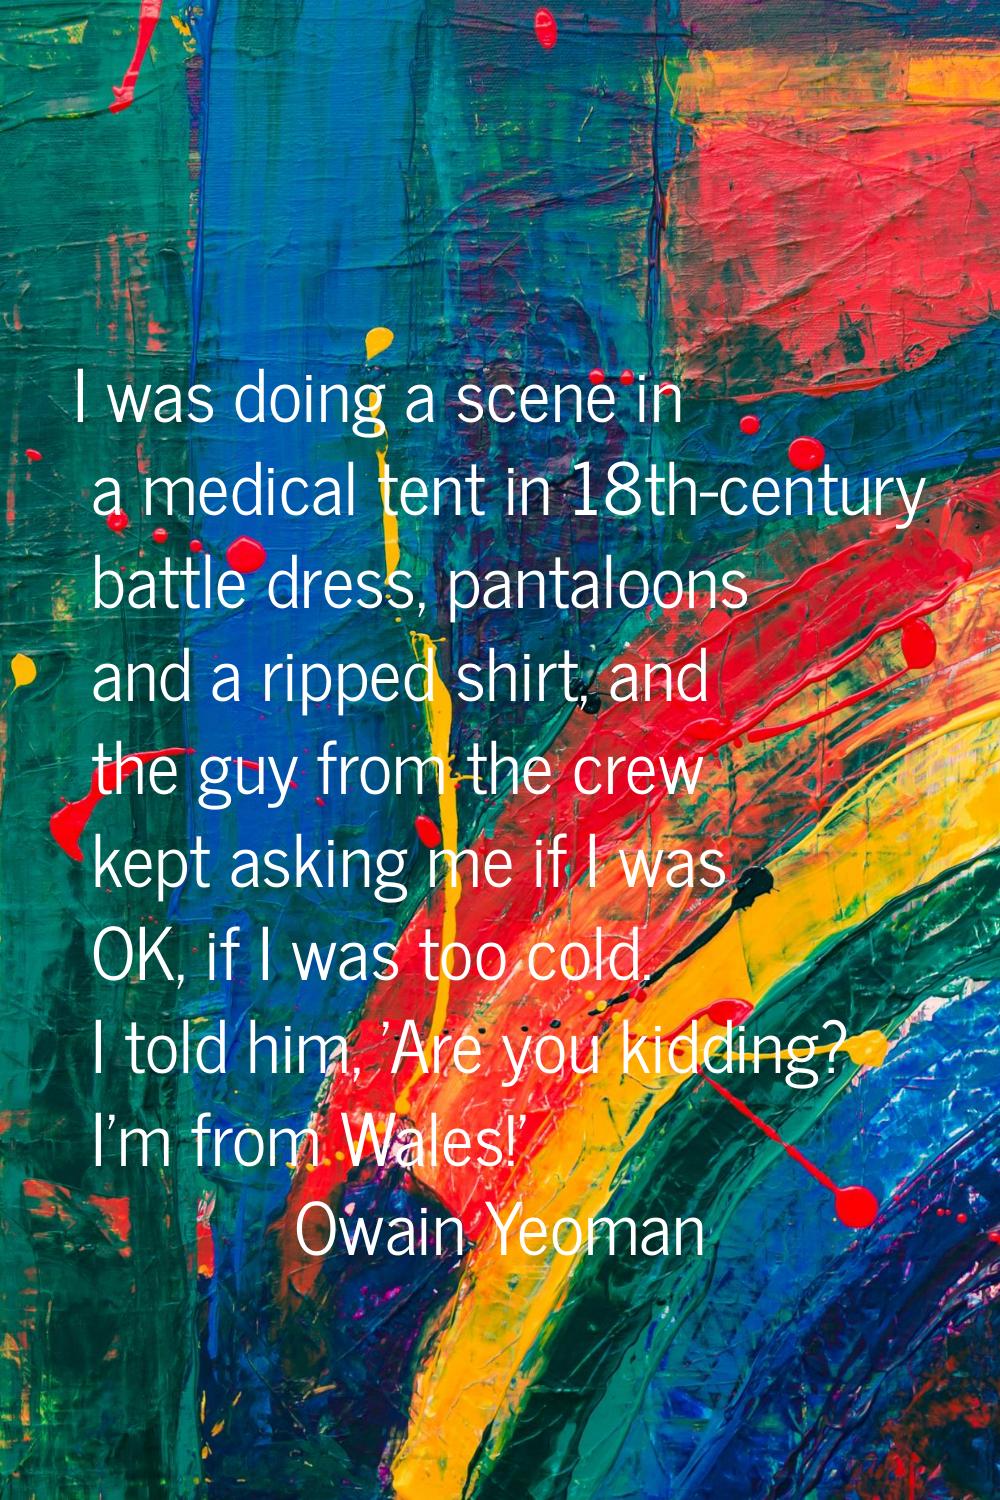 I was doing a scene in a medical tent in 18th-century battle dress, pantaloons and a ripped shirt, 